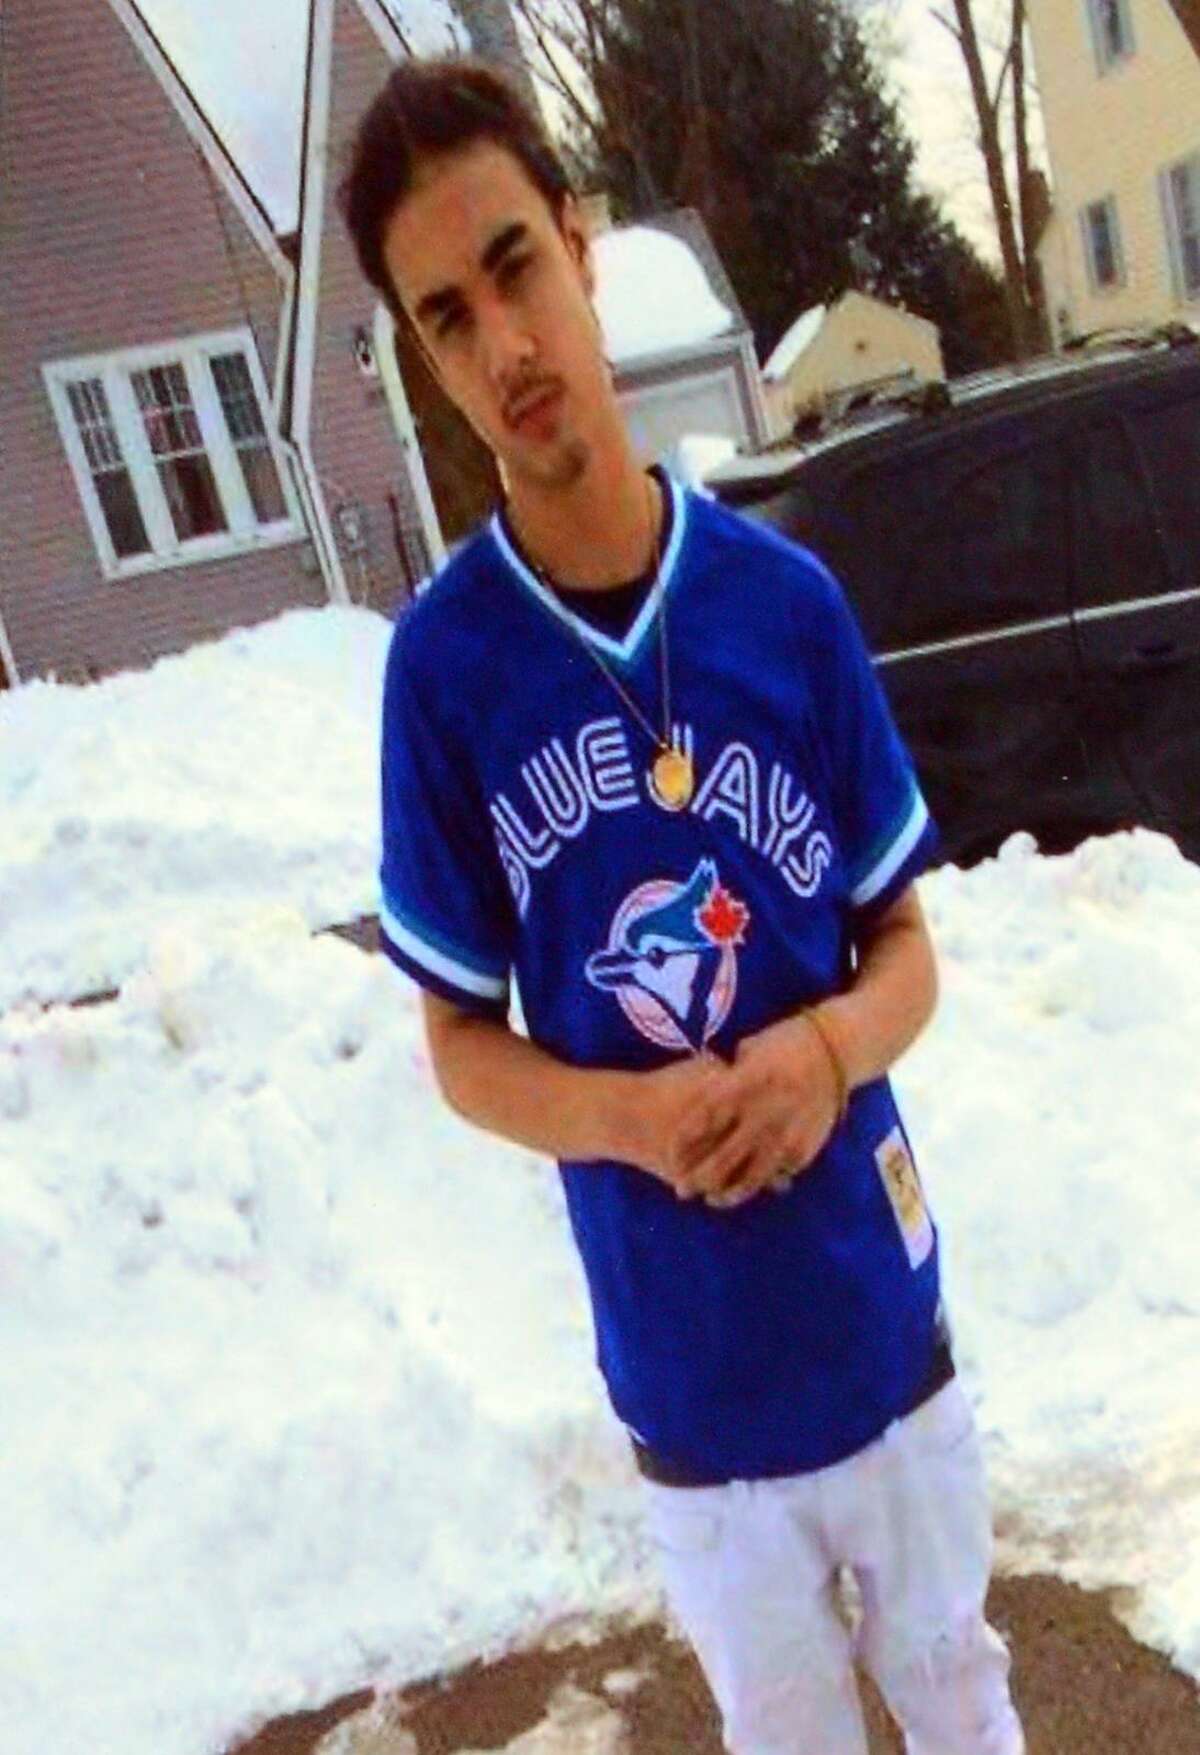 A photo of Eric Diaz at a memorial erected in his honor on Beardsley Street in Bridgeport, Conn. on Thursday Sept. 15, 2017. Bridgeport police spokesman Av Harris said the 19-year-old Diaz was shot dead Thursday around 11 p.m. Diaz was found shot in the stomach after police responded to a report of shots fired at the intersection of Beardsley Street and Newfield Avenue.